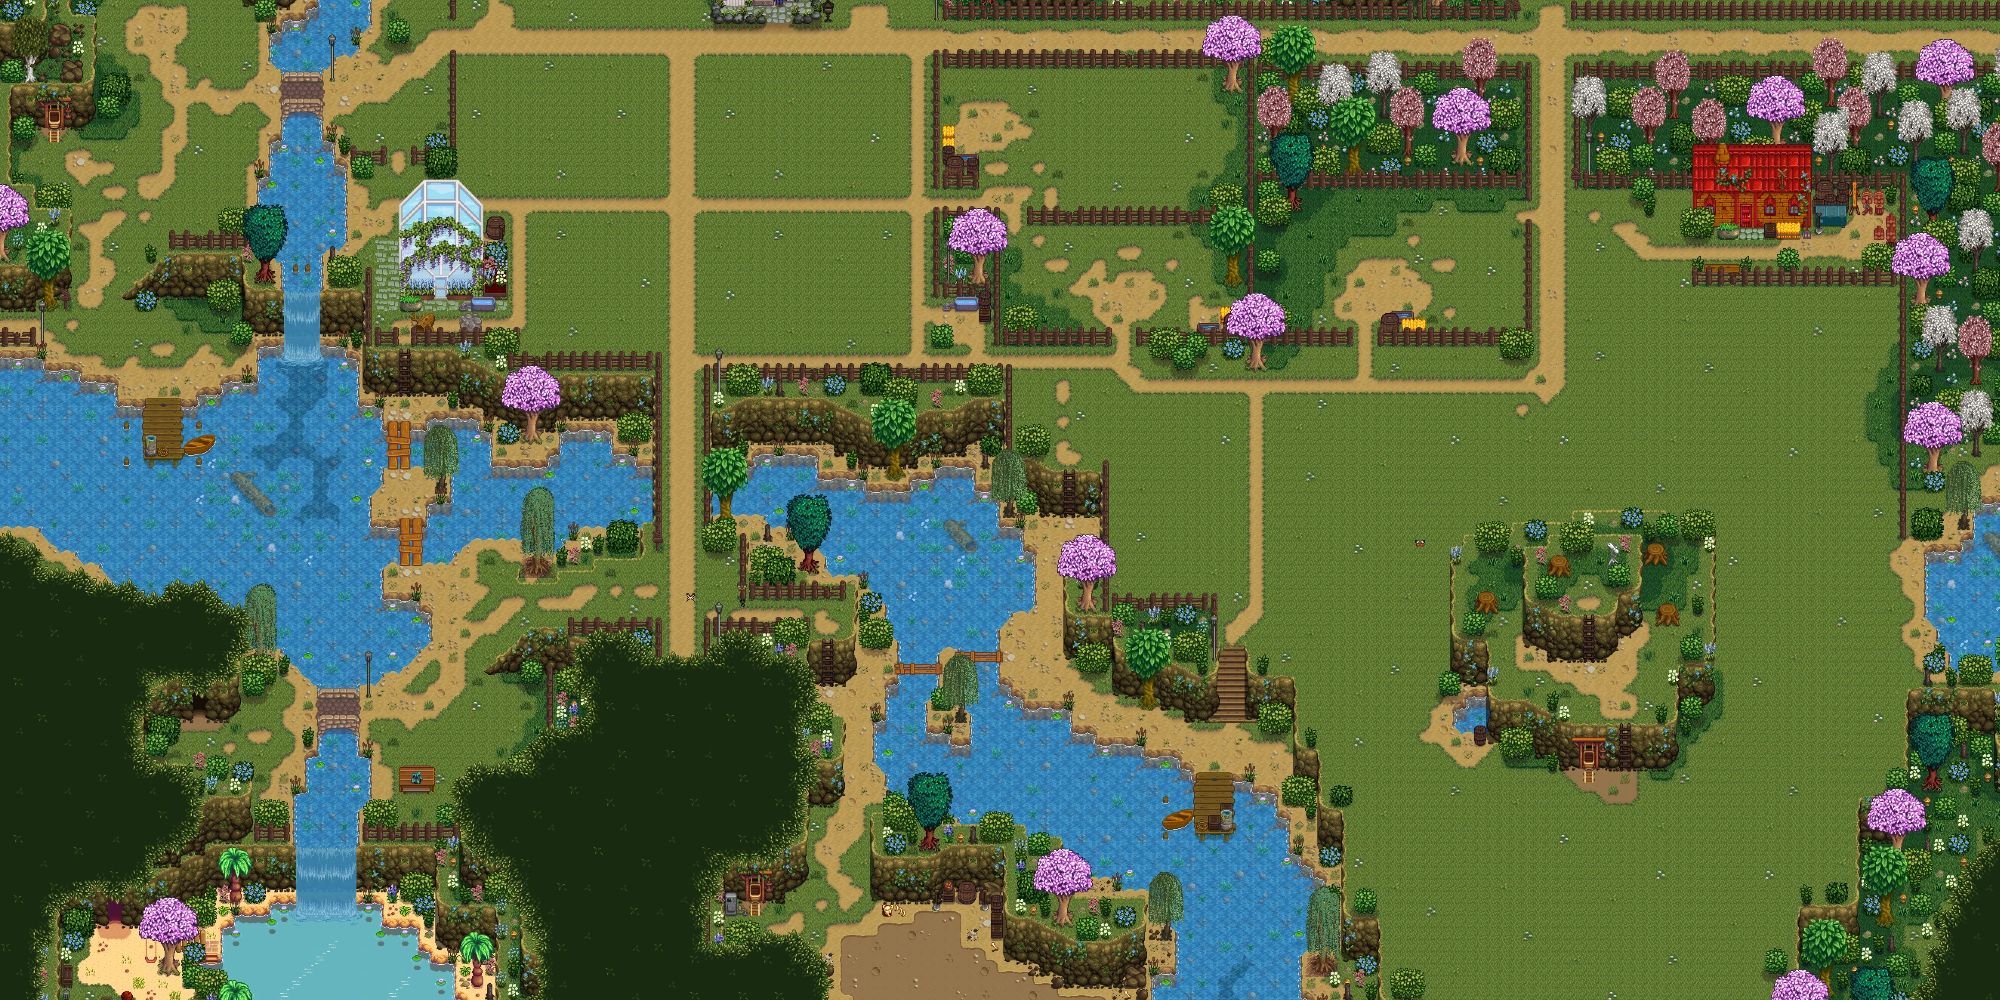 immersive farm 2 stardew valley map zoomed in